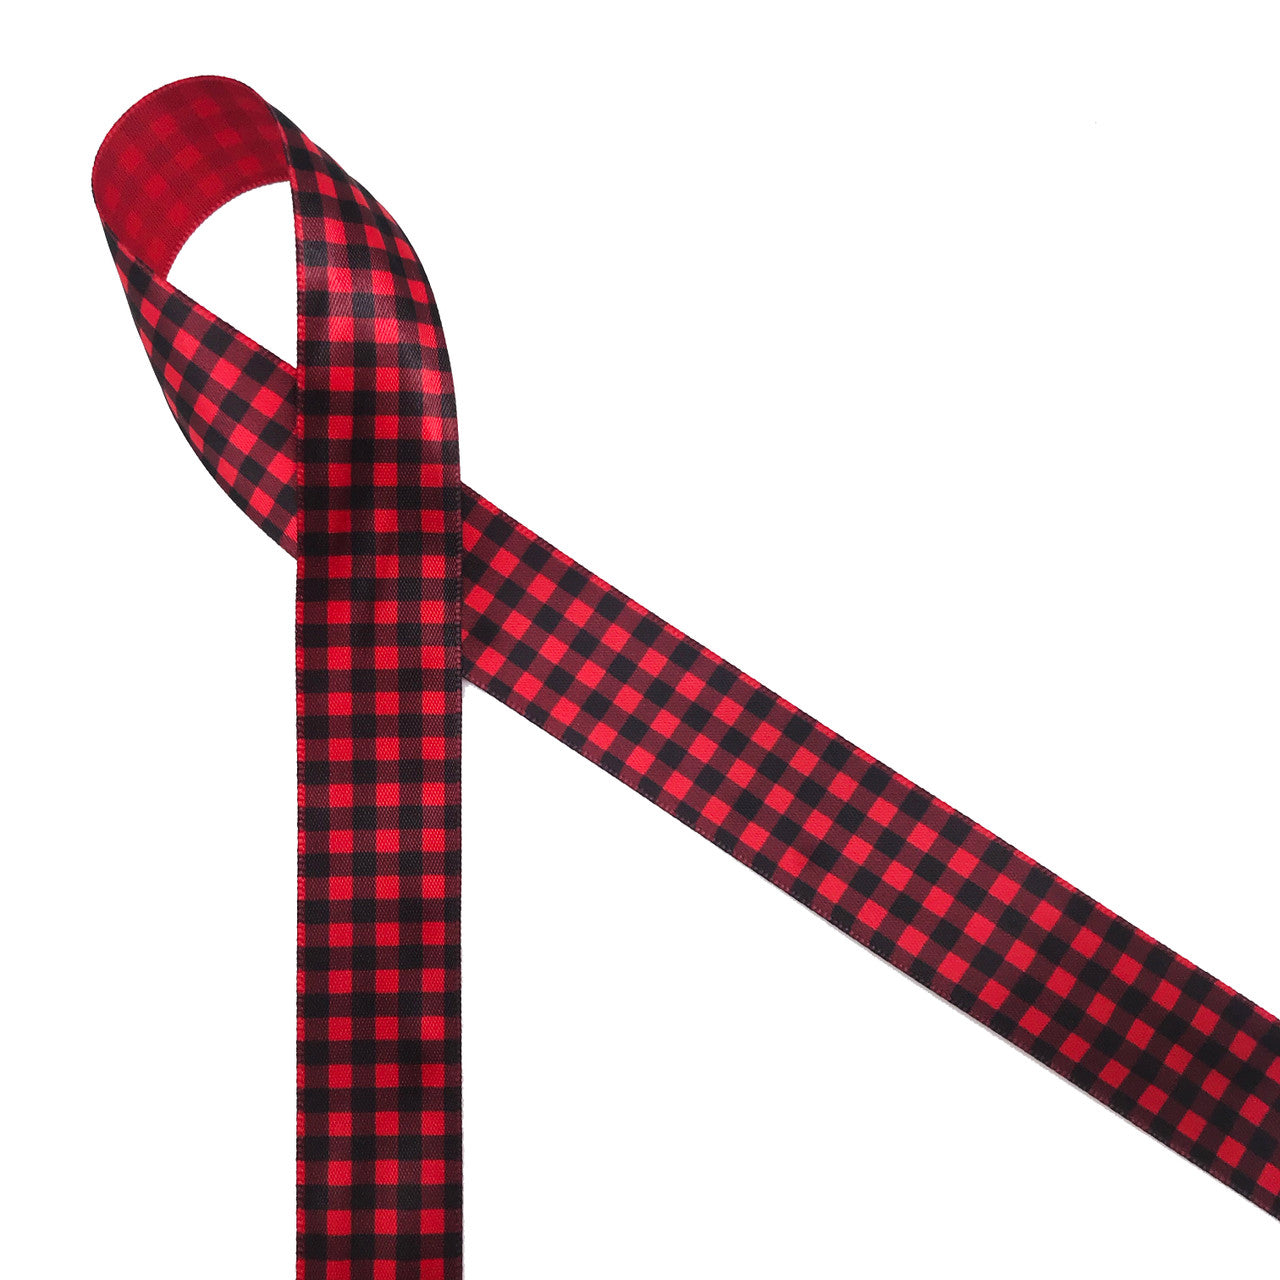 Red and black buffalo plaid is printed on7/8" red  single face satin ribbon. Red and black plaid is a great pattern for Fall themed parties. This traditional plaid also makes a country Christmas theme complete.